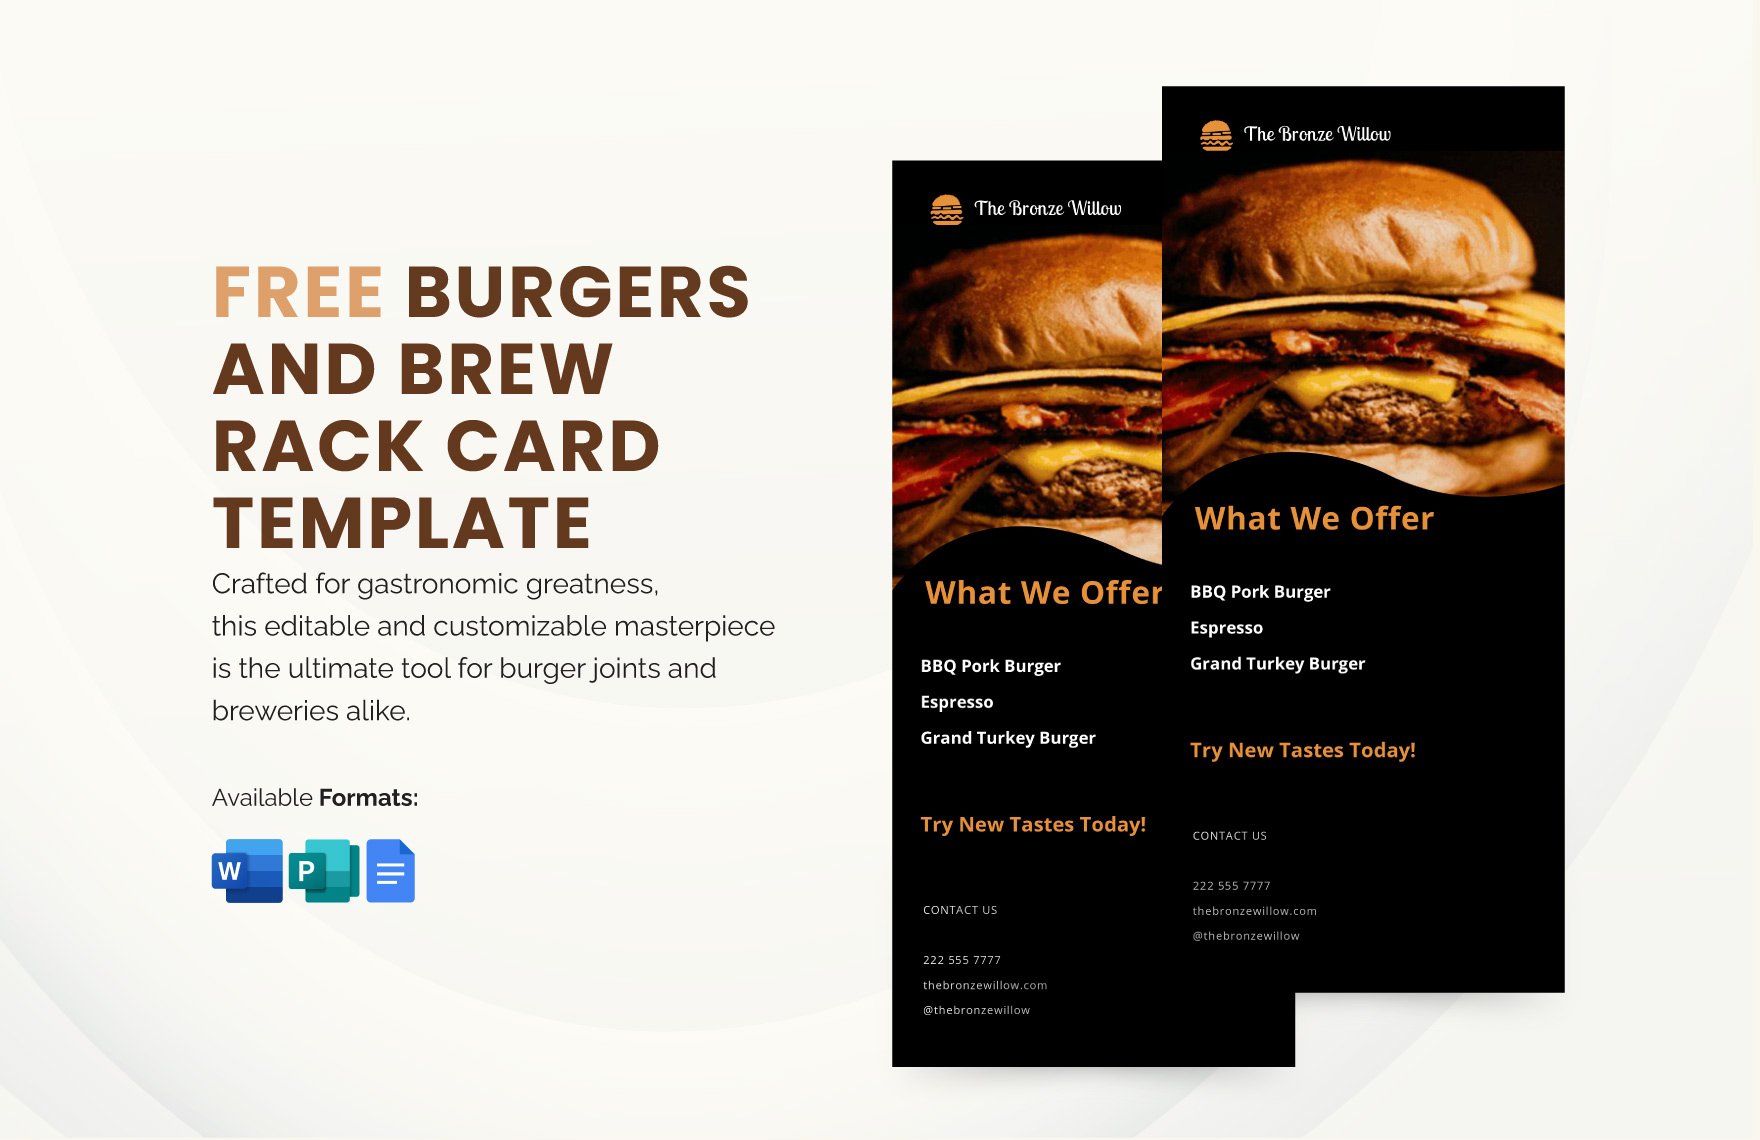 Free Burgers and Brews Rack Card Template in Word, Google Docs, Publisher